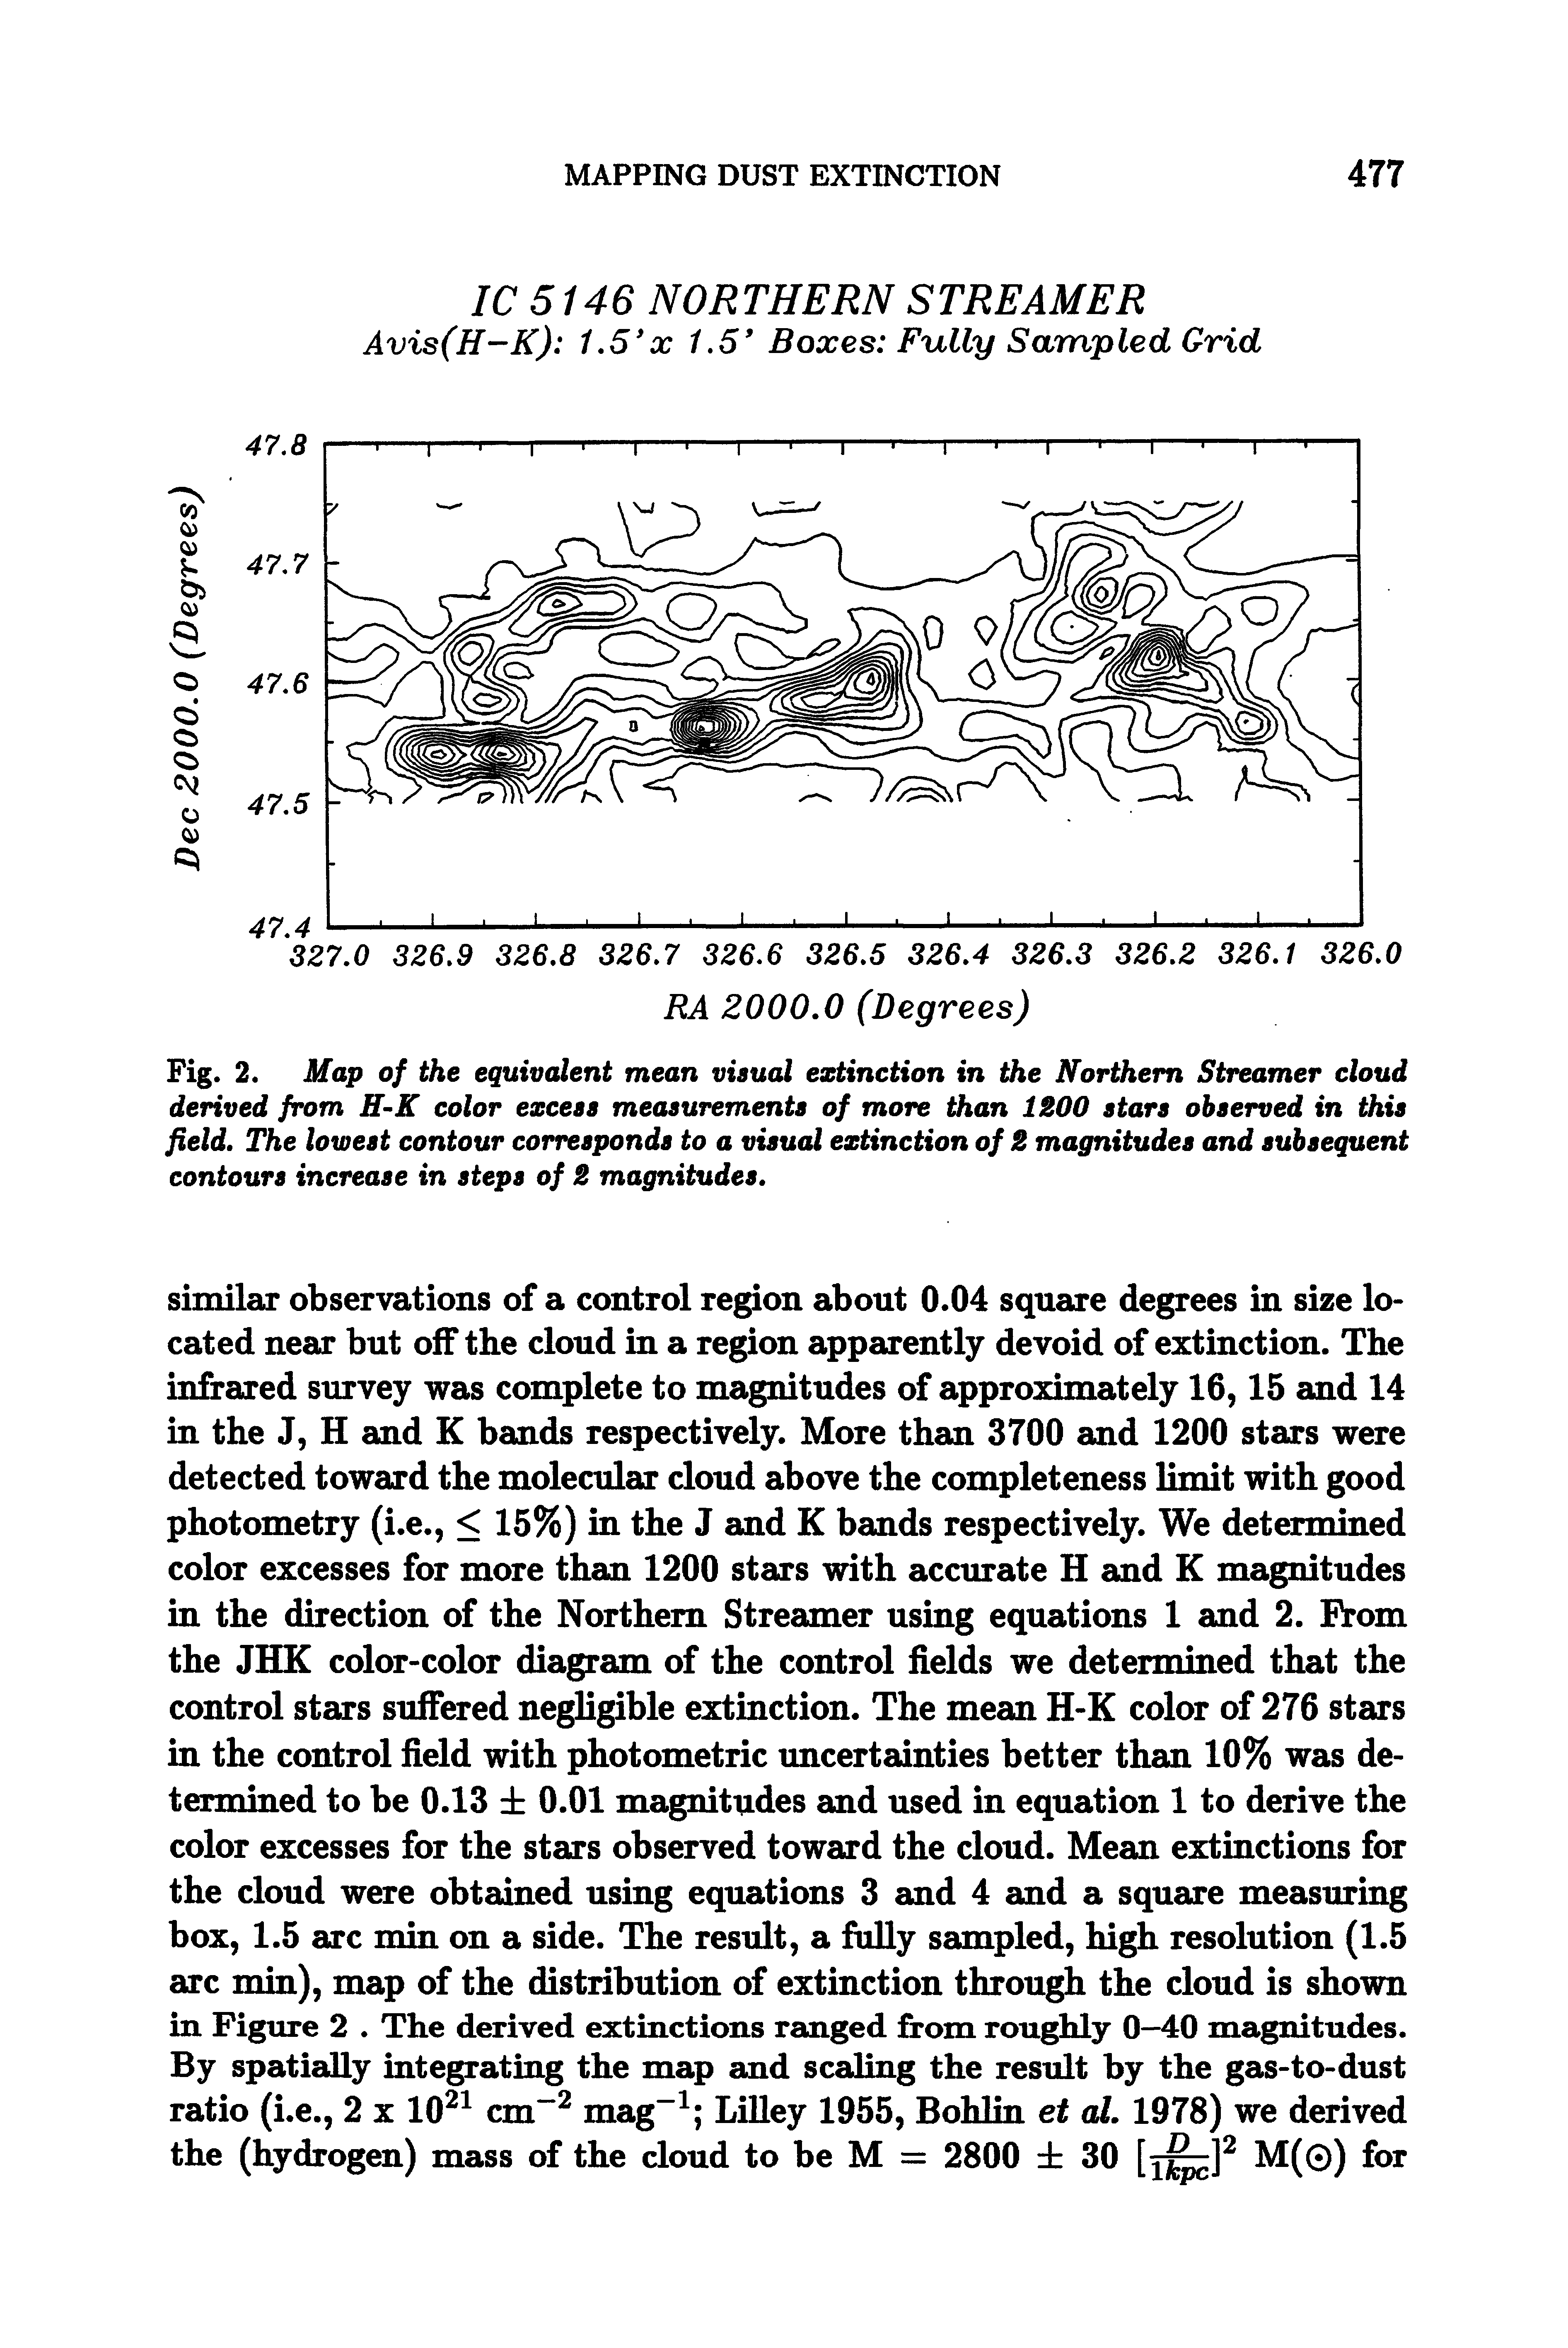 Fig. 2. Map of the equivalent mean visual extinction in the Northern Streamer cloud derived from H-K color excess measurements of more than 1200 stars observed in this field. The lowest contour corresponds to a visual extinction of 2 magnitudes and subsequent contours increase in steps of 2 magnitudes.